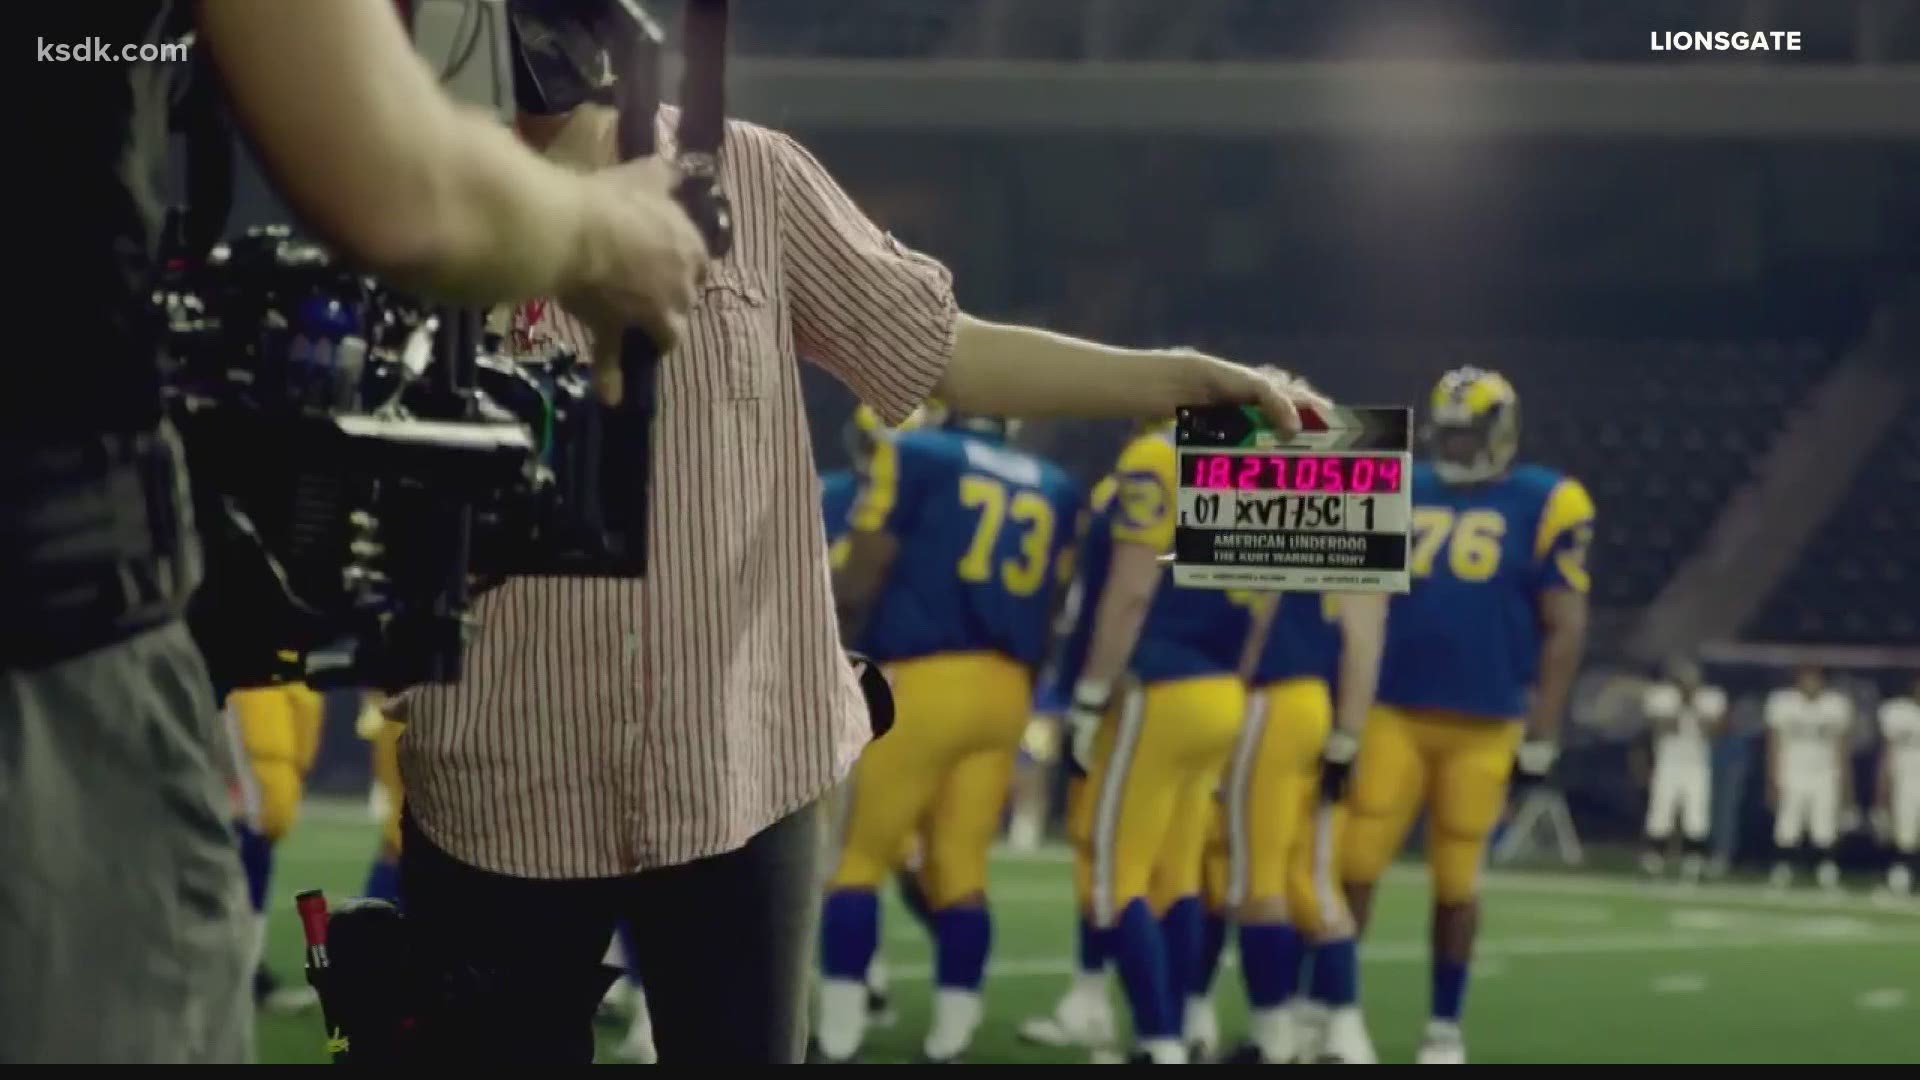 The Kurt Warner story is coming to the big screen in December. Here's a first look at Zachary Levi as the St. Louis Rams icon